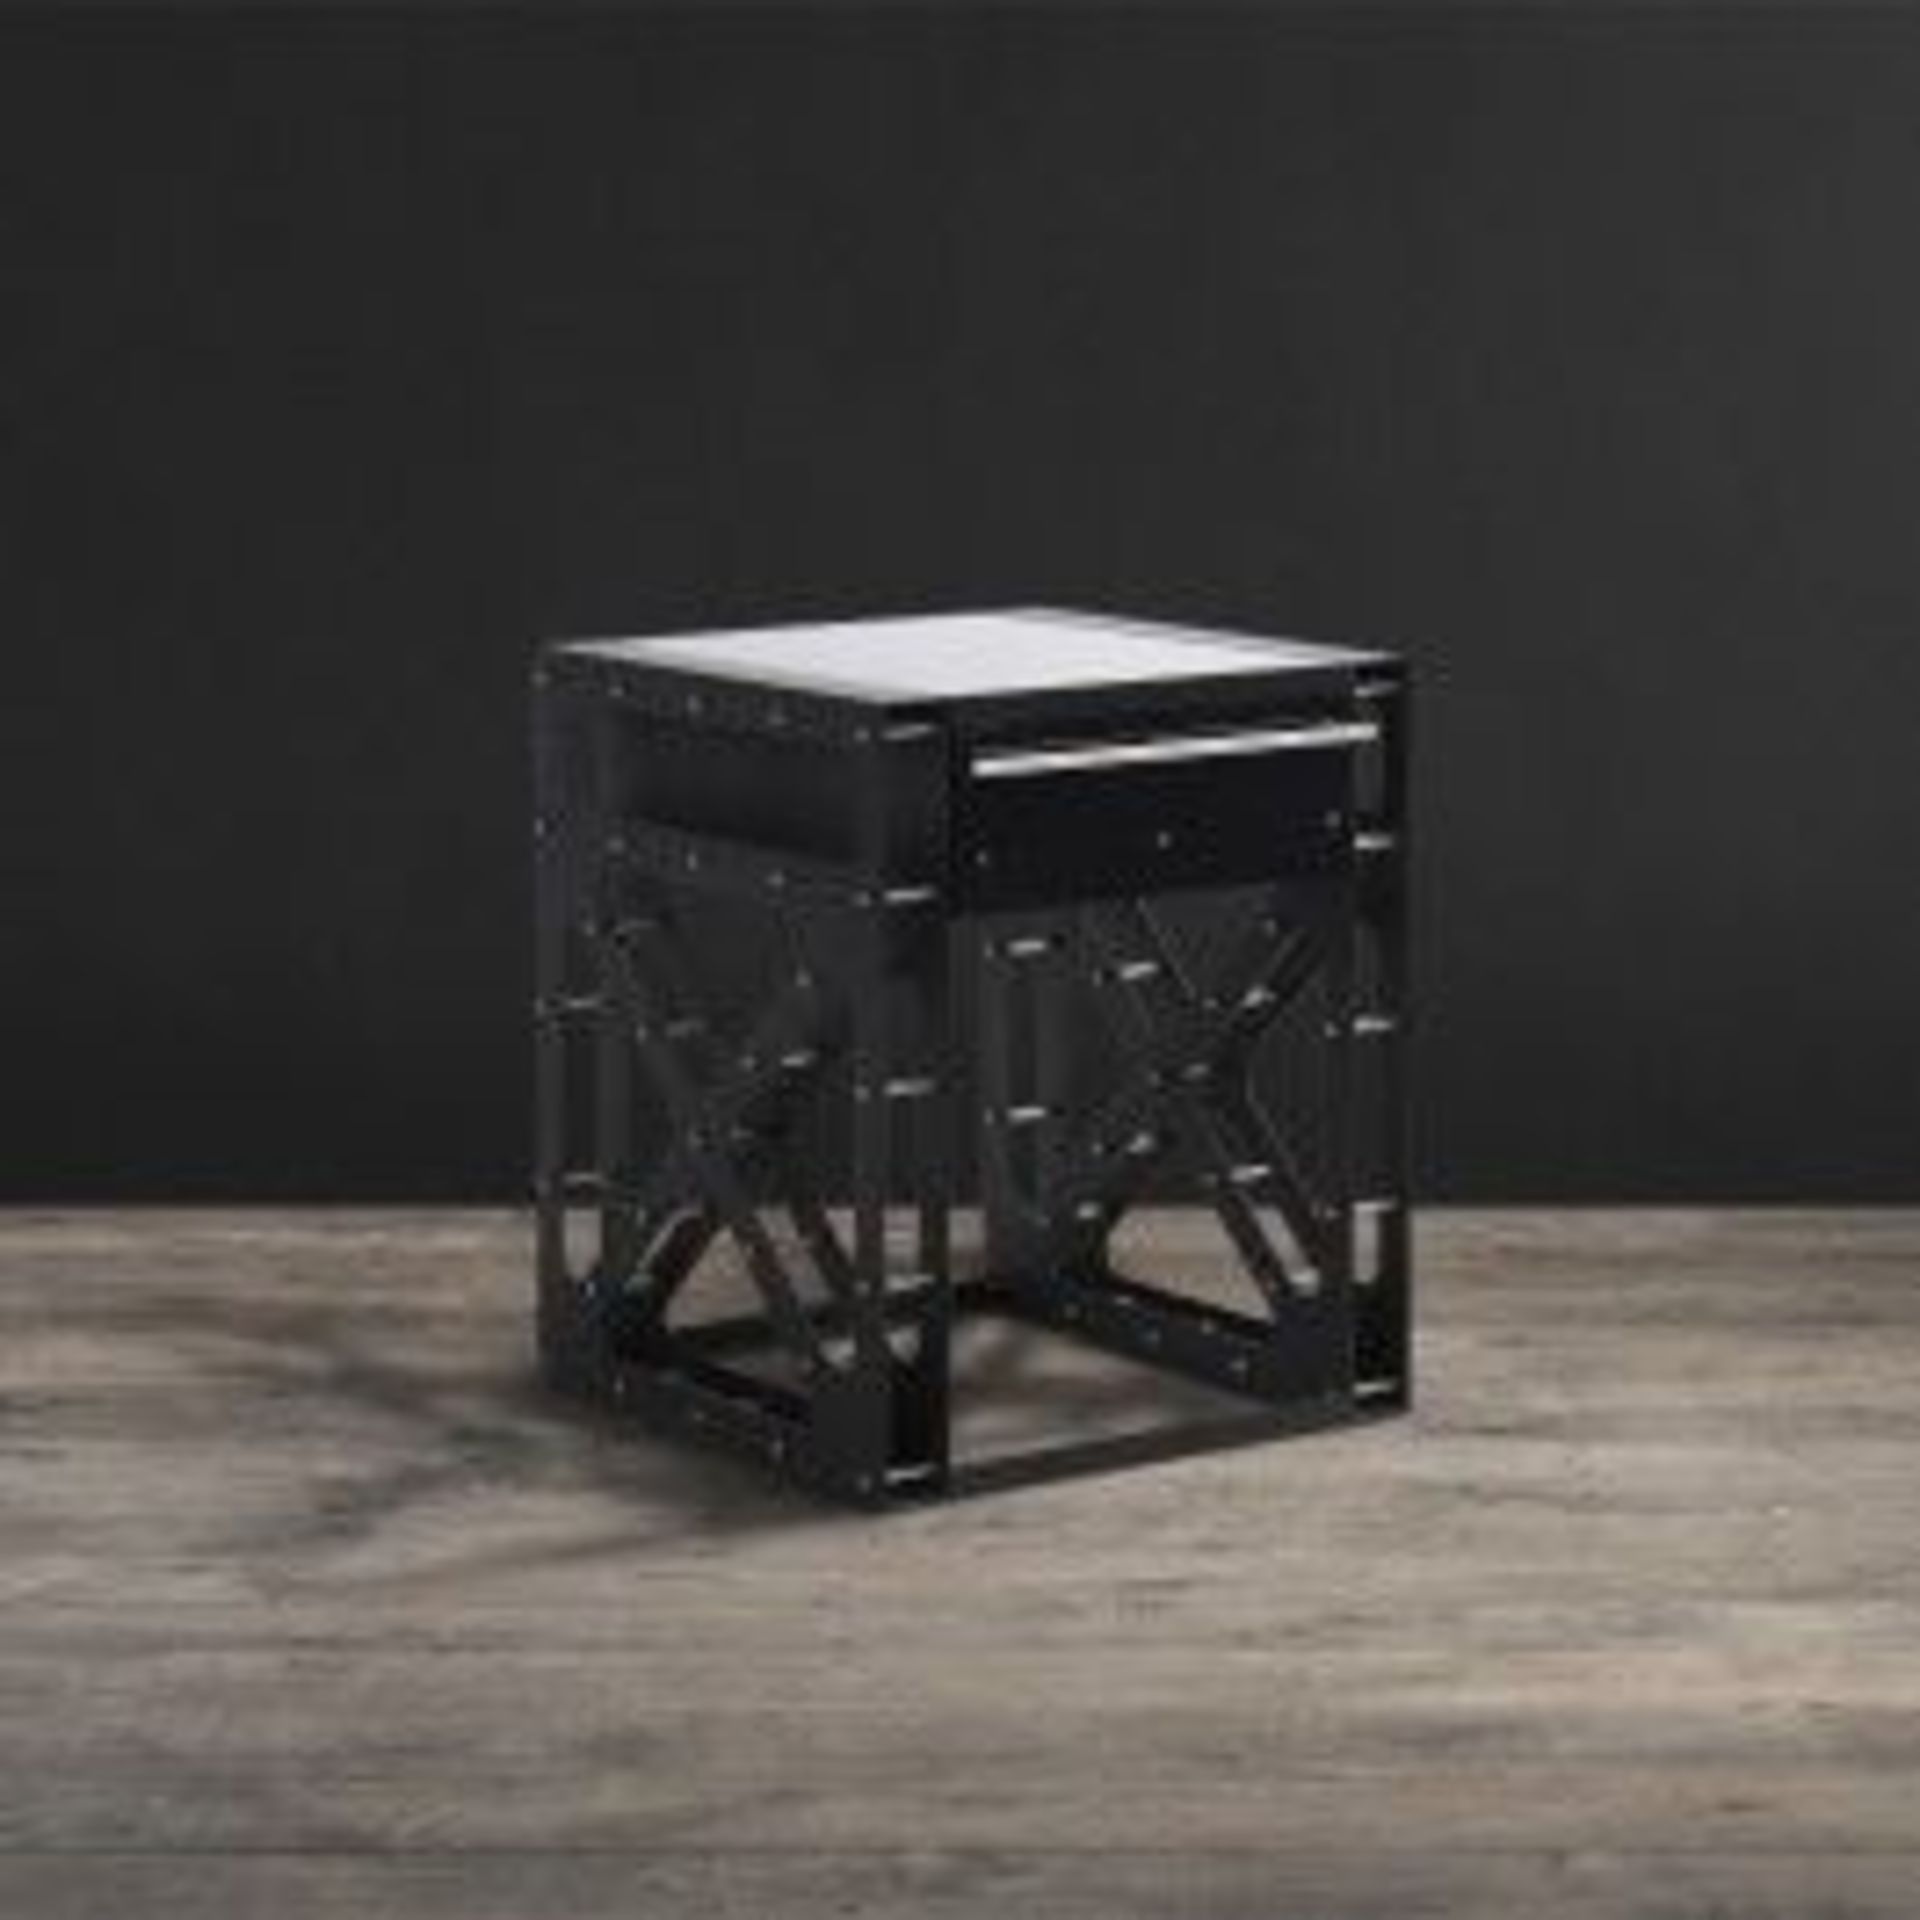 Spectrum Square Side Table Inspired By Industrial Machines The Spectrum Collection Is Handcrafted